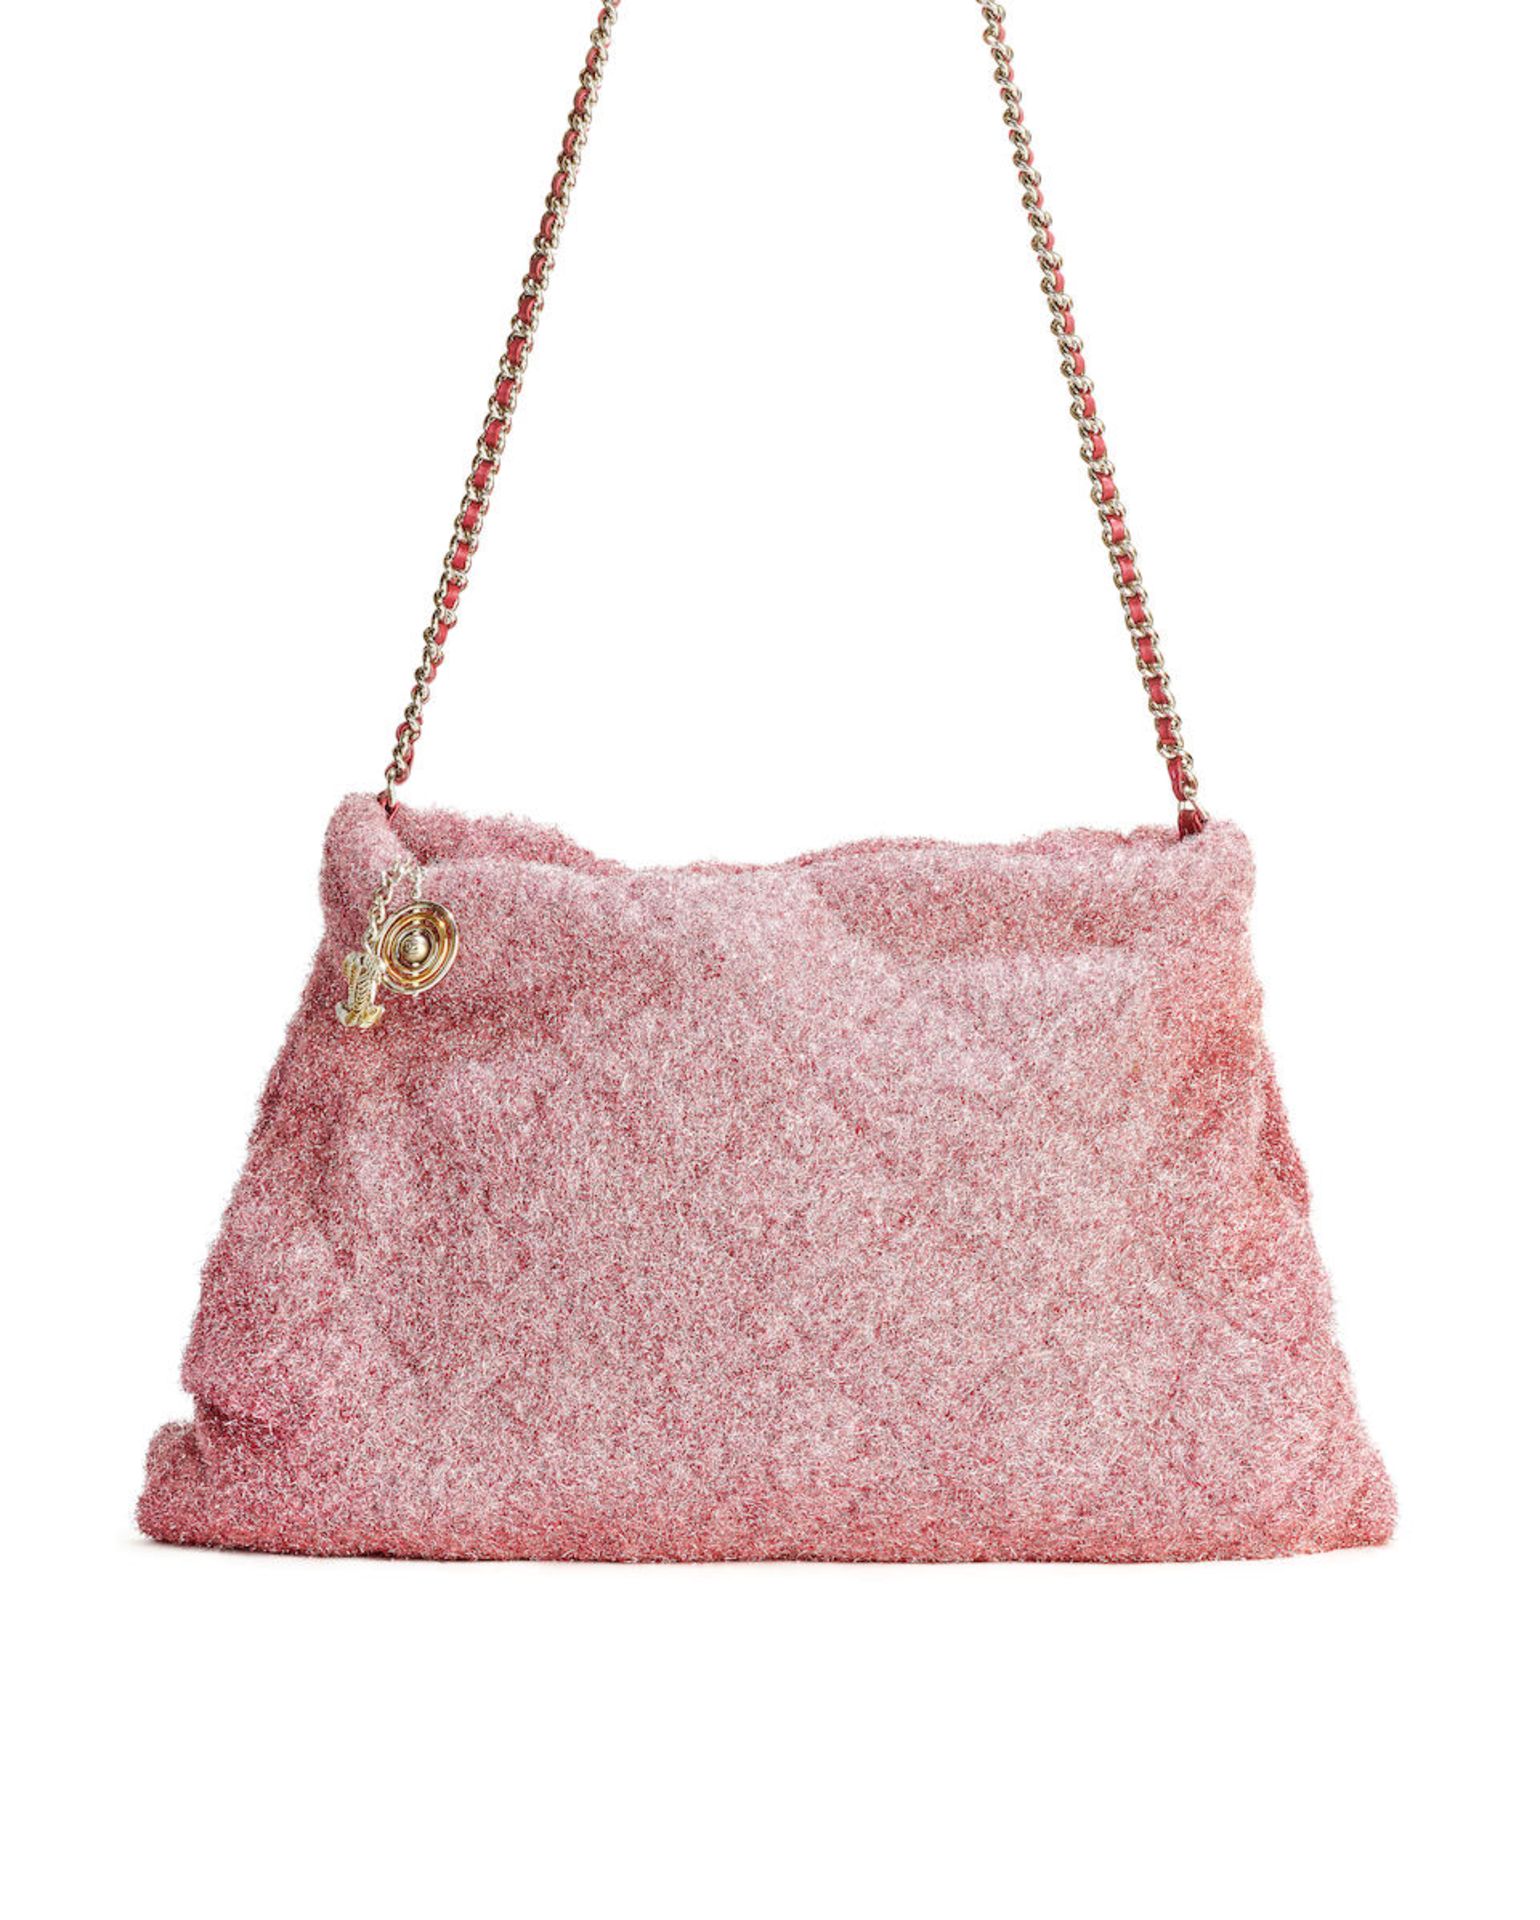 CHANEL: METALLIC PINK KNIT QUILTLED PLUTO GLITTER LARGE TOTE BAG WITH SILVER TONED HARDWARE (Inc...